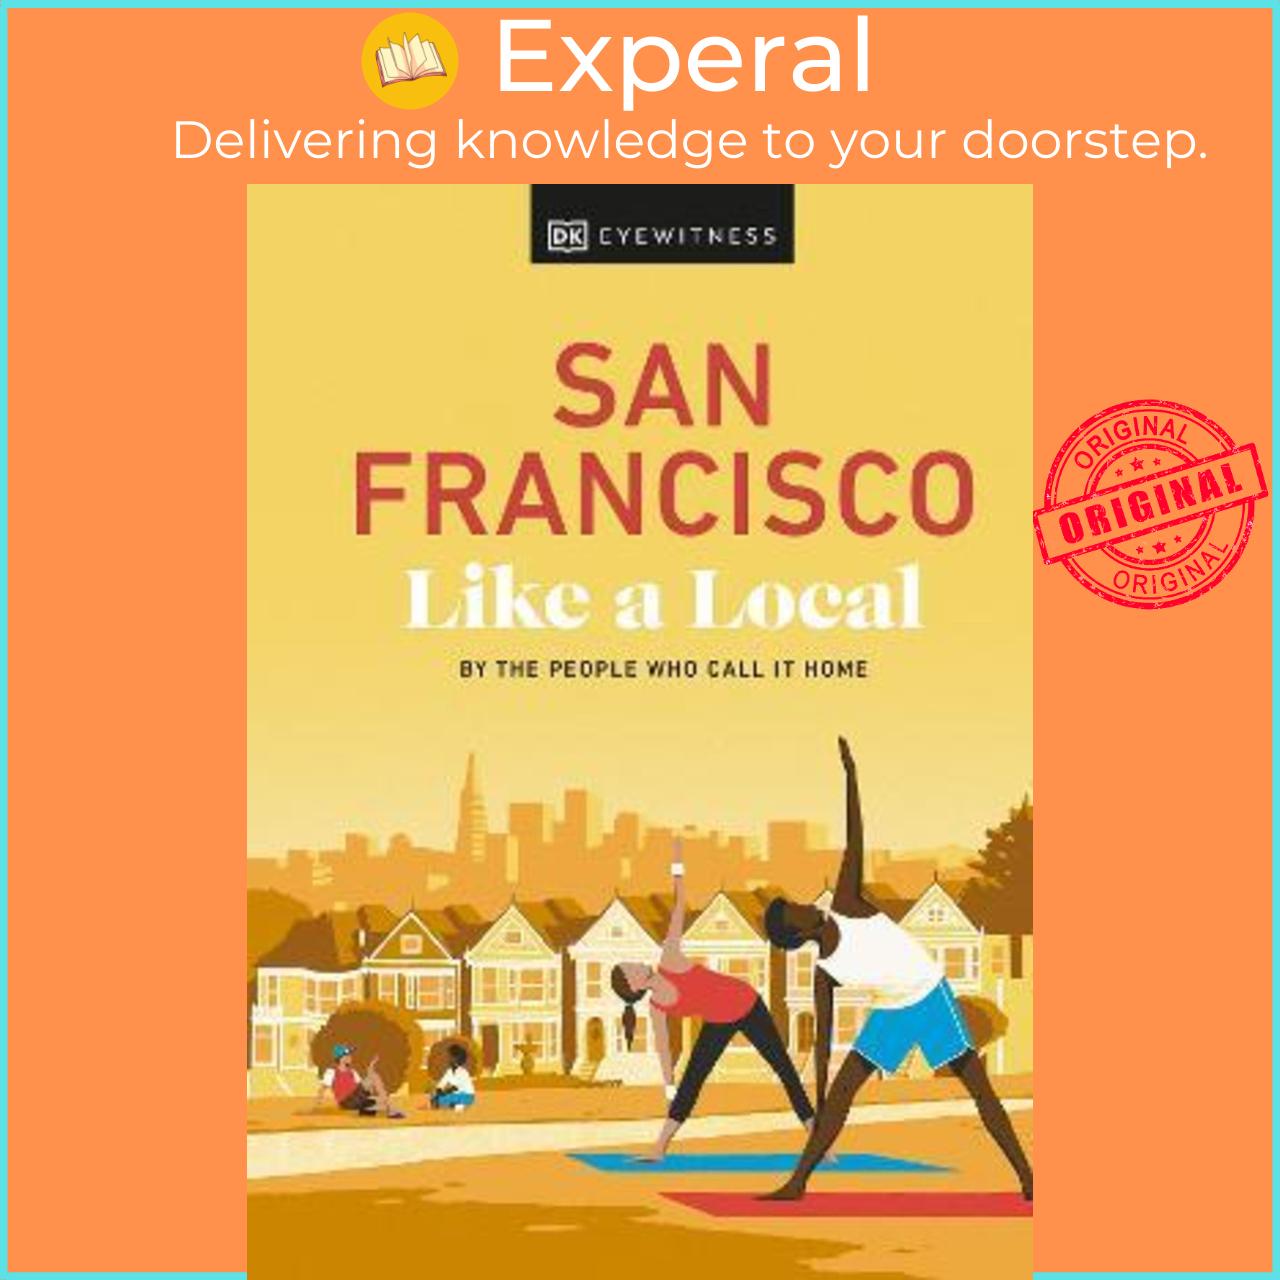 Sách - San Francisco Like a Local : By the People Who Call It Home by DK Eyewitness (UK edition, hardcover)